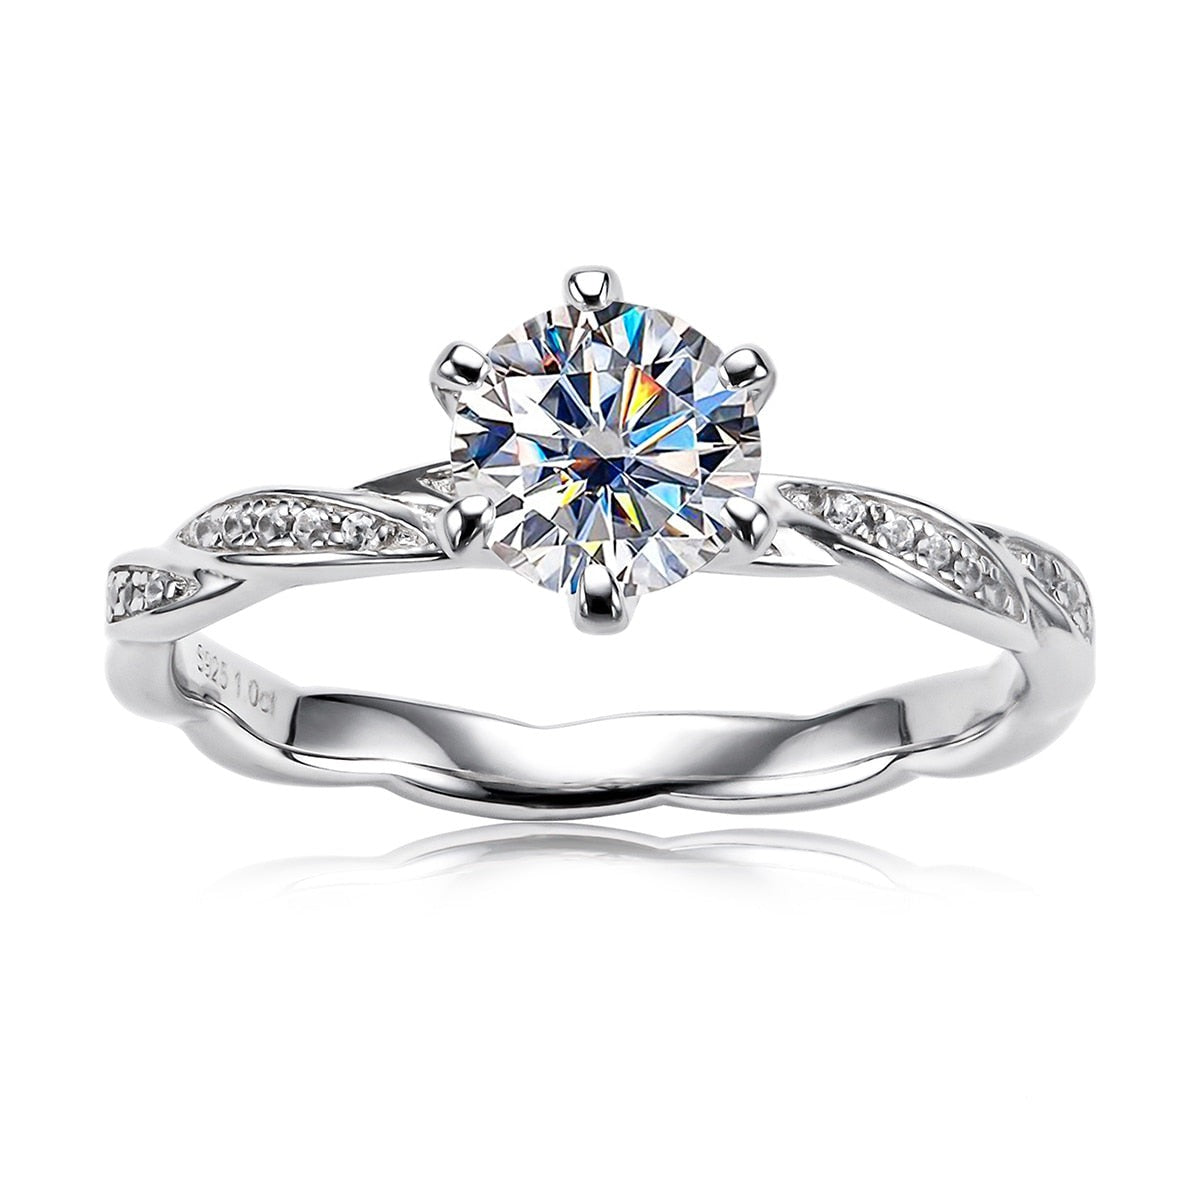 A silver ring with a twisted pave band and set with a round 1CT moissanite.